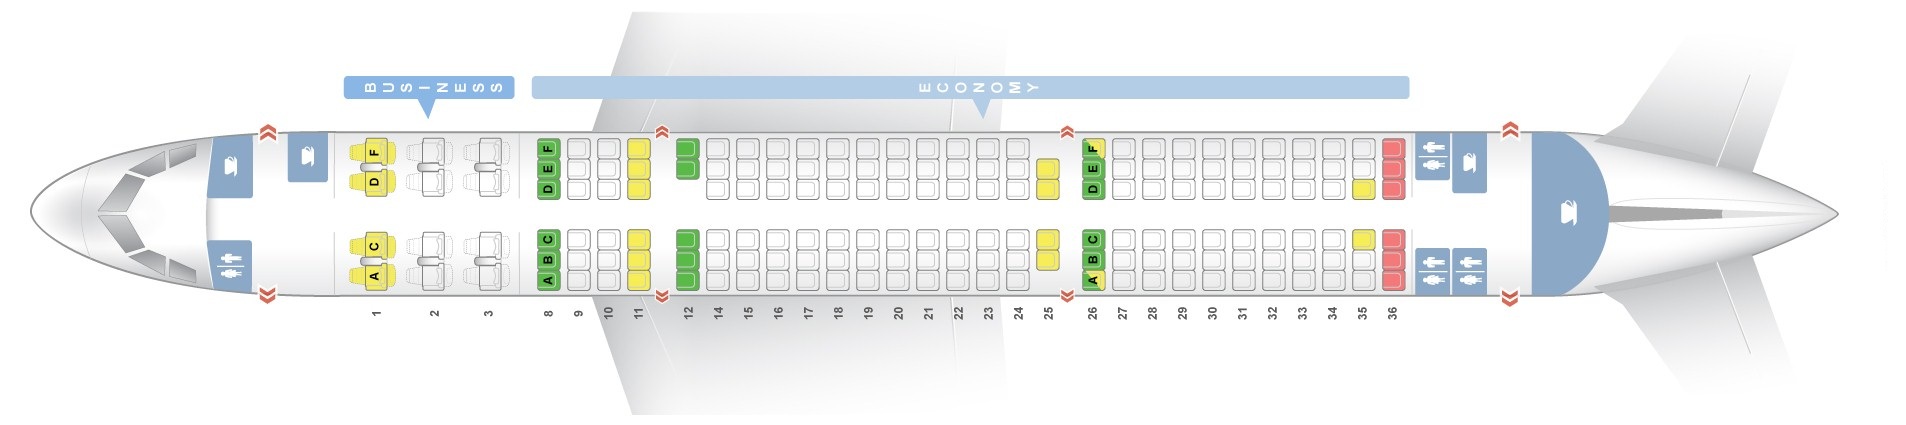 Seat map Airbus A321200 Qatar Airways. Best seats in the